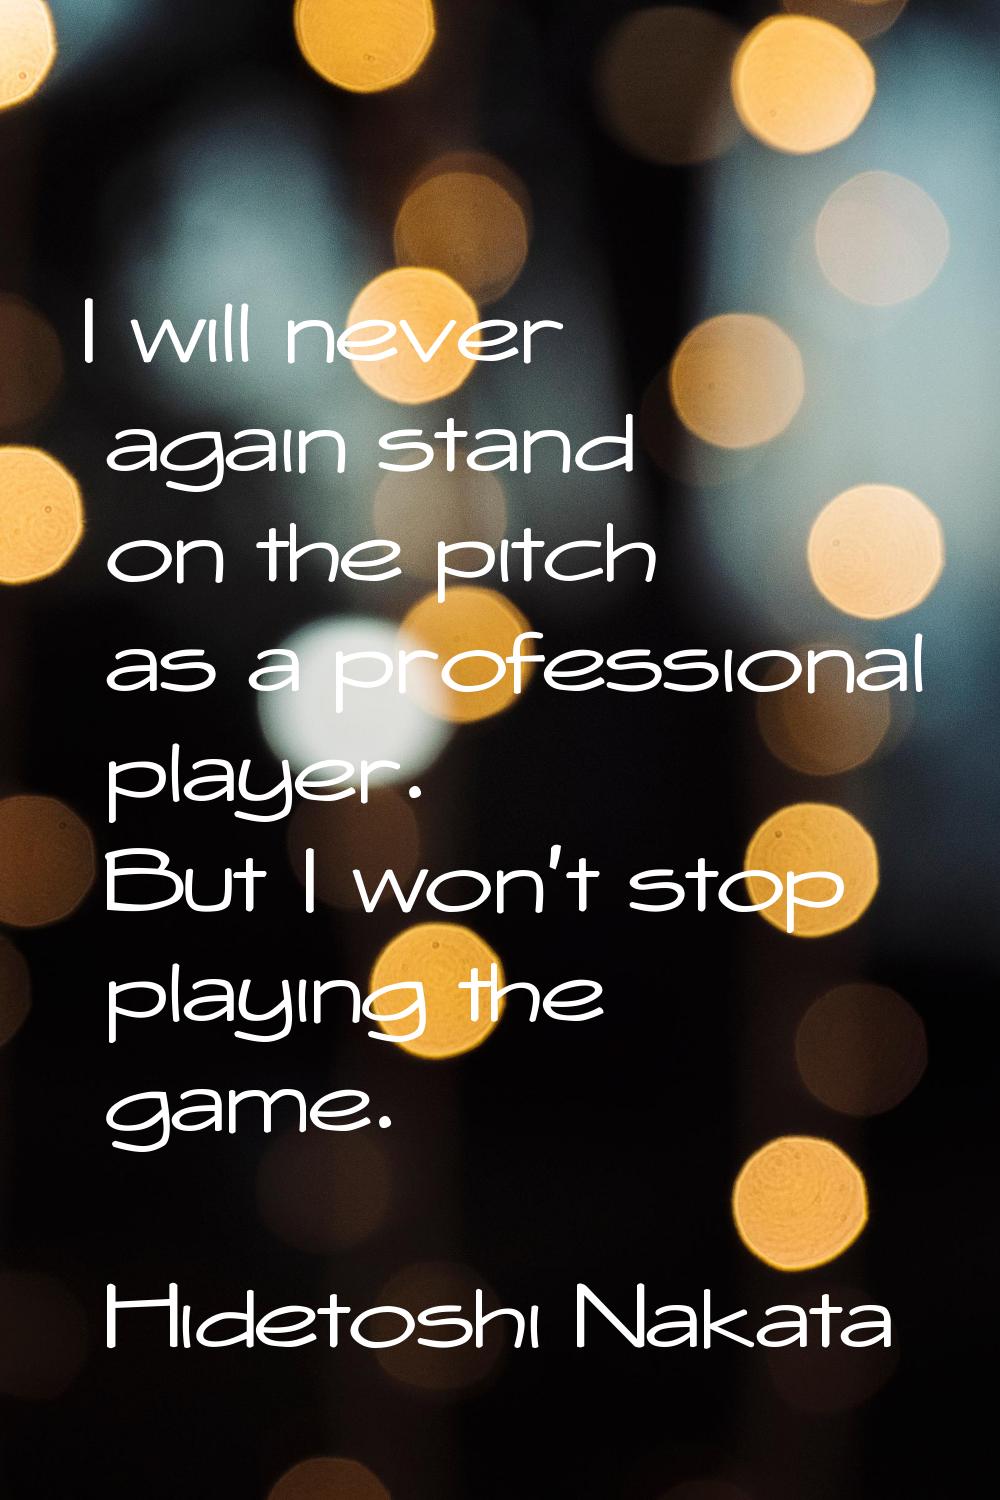 I will never again stand on the pitch as a professional player. But I won't stop playing the game.